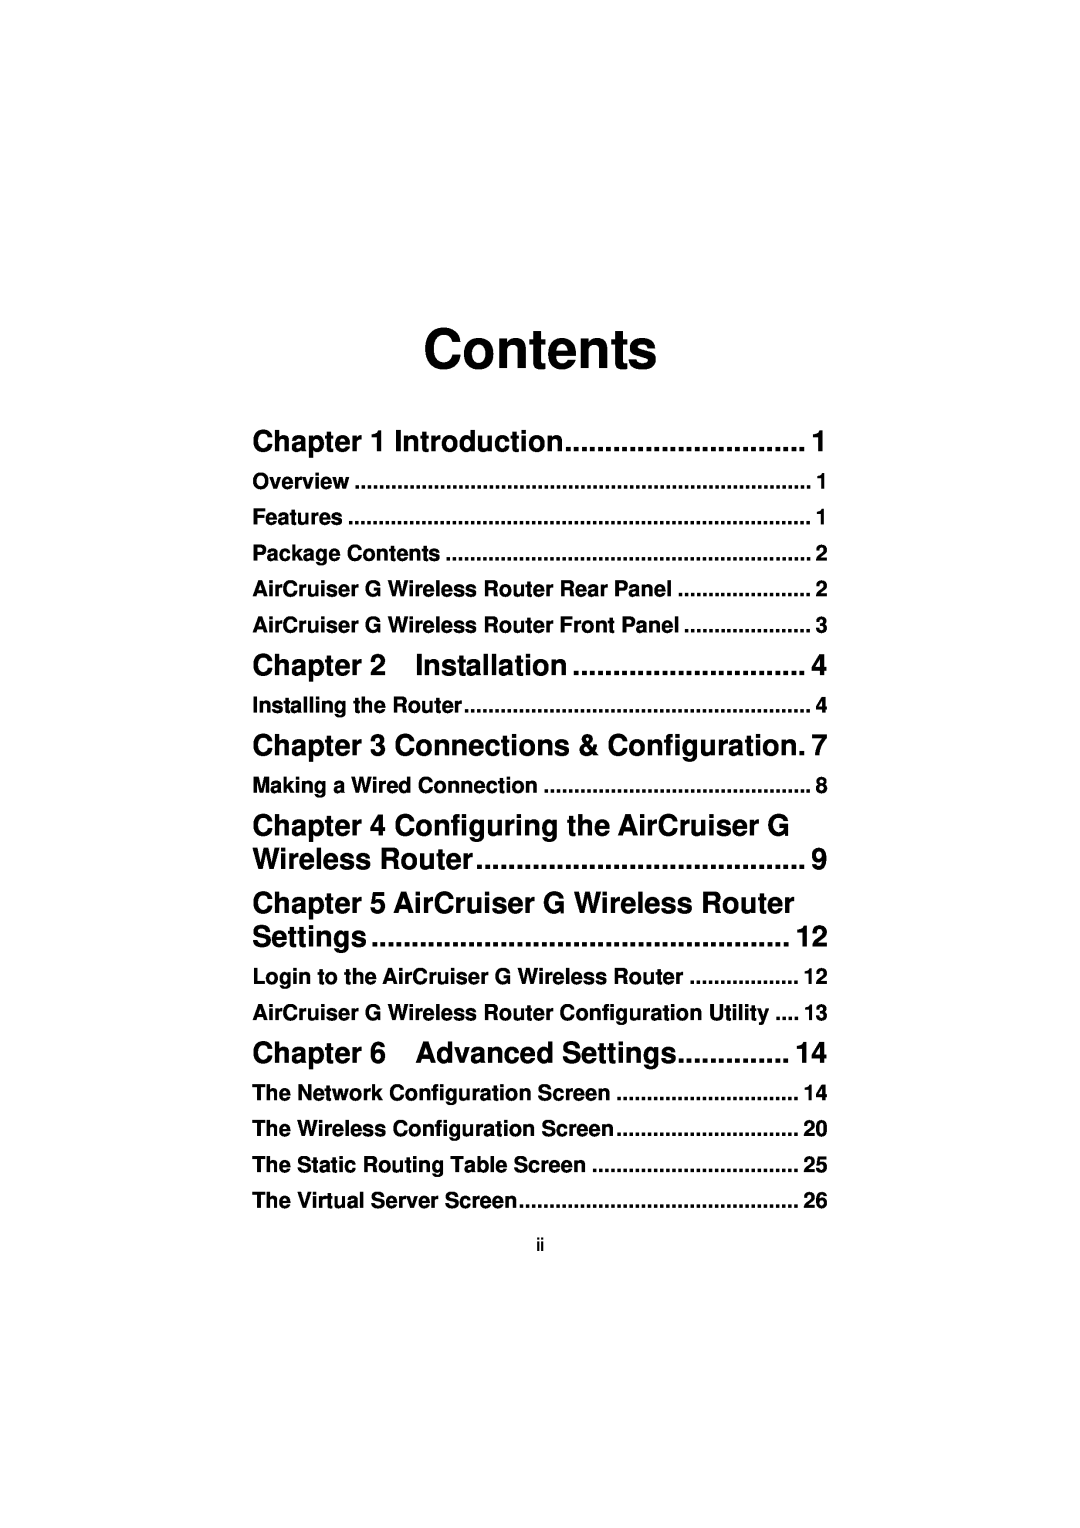 Gigabyte GN-BR01G manual Chapter, Connections & Configuration, Configuring the AirCruiser G, AirCruiser G Wireless Router 